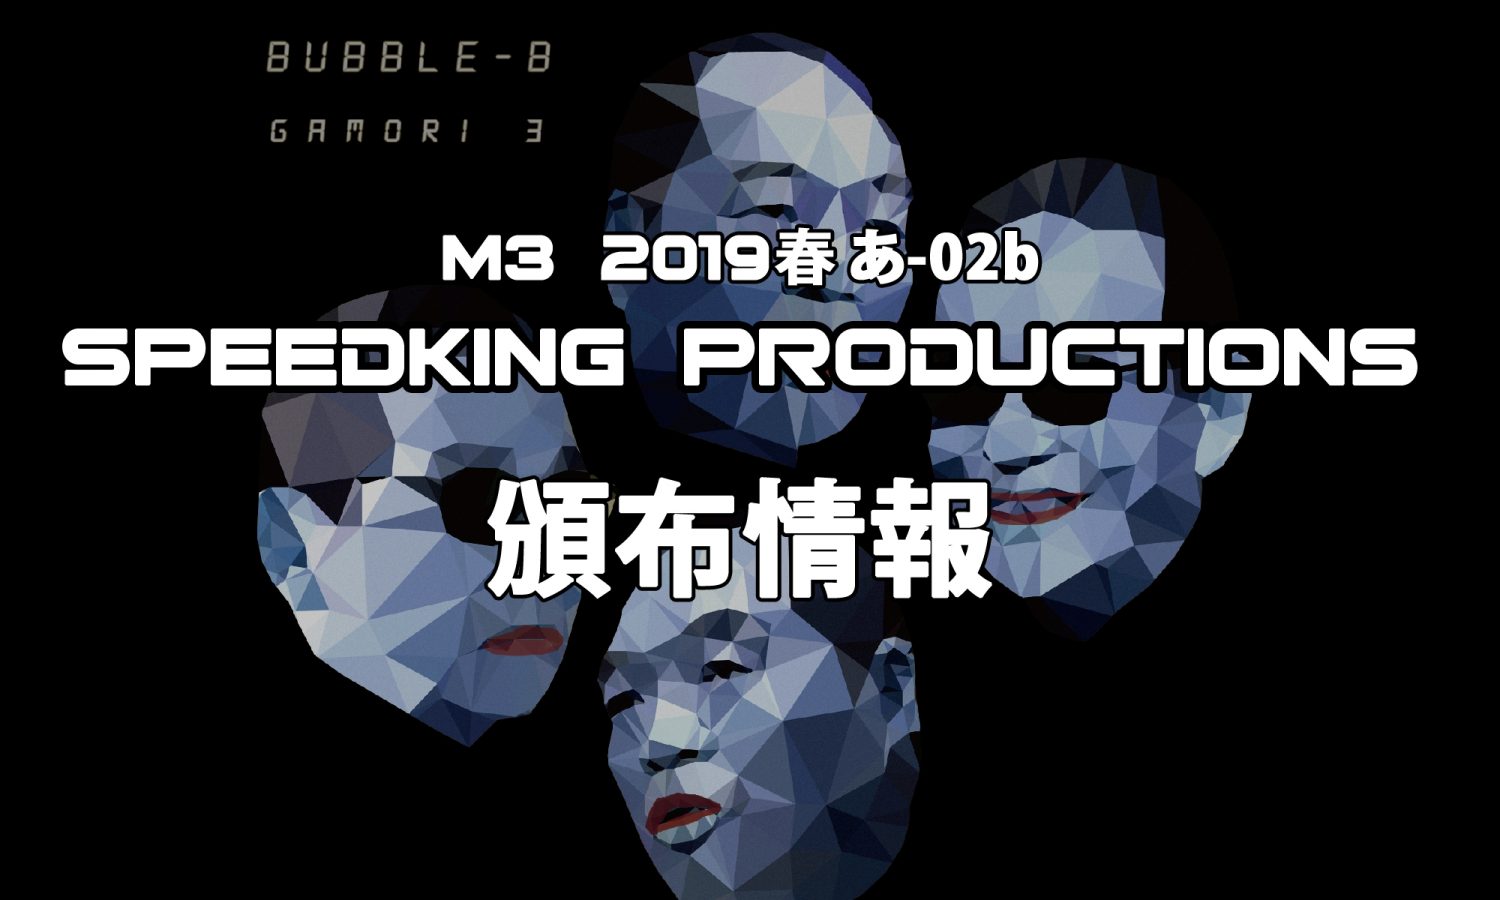 2019 M3 SPEEDKING PRODUCTIONSブース(あ-02a)頒布情報。